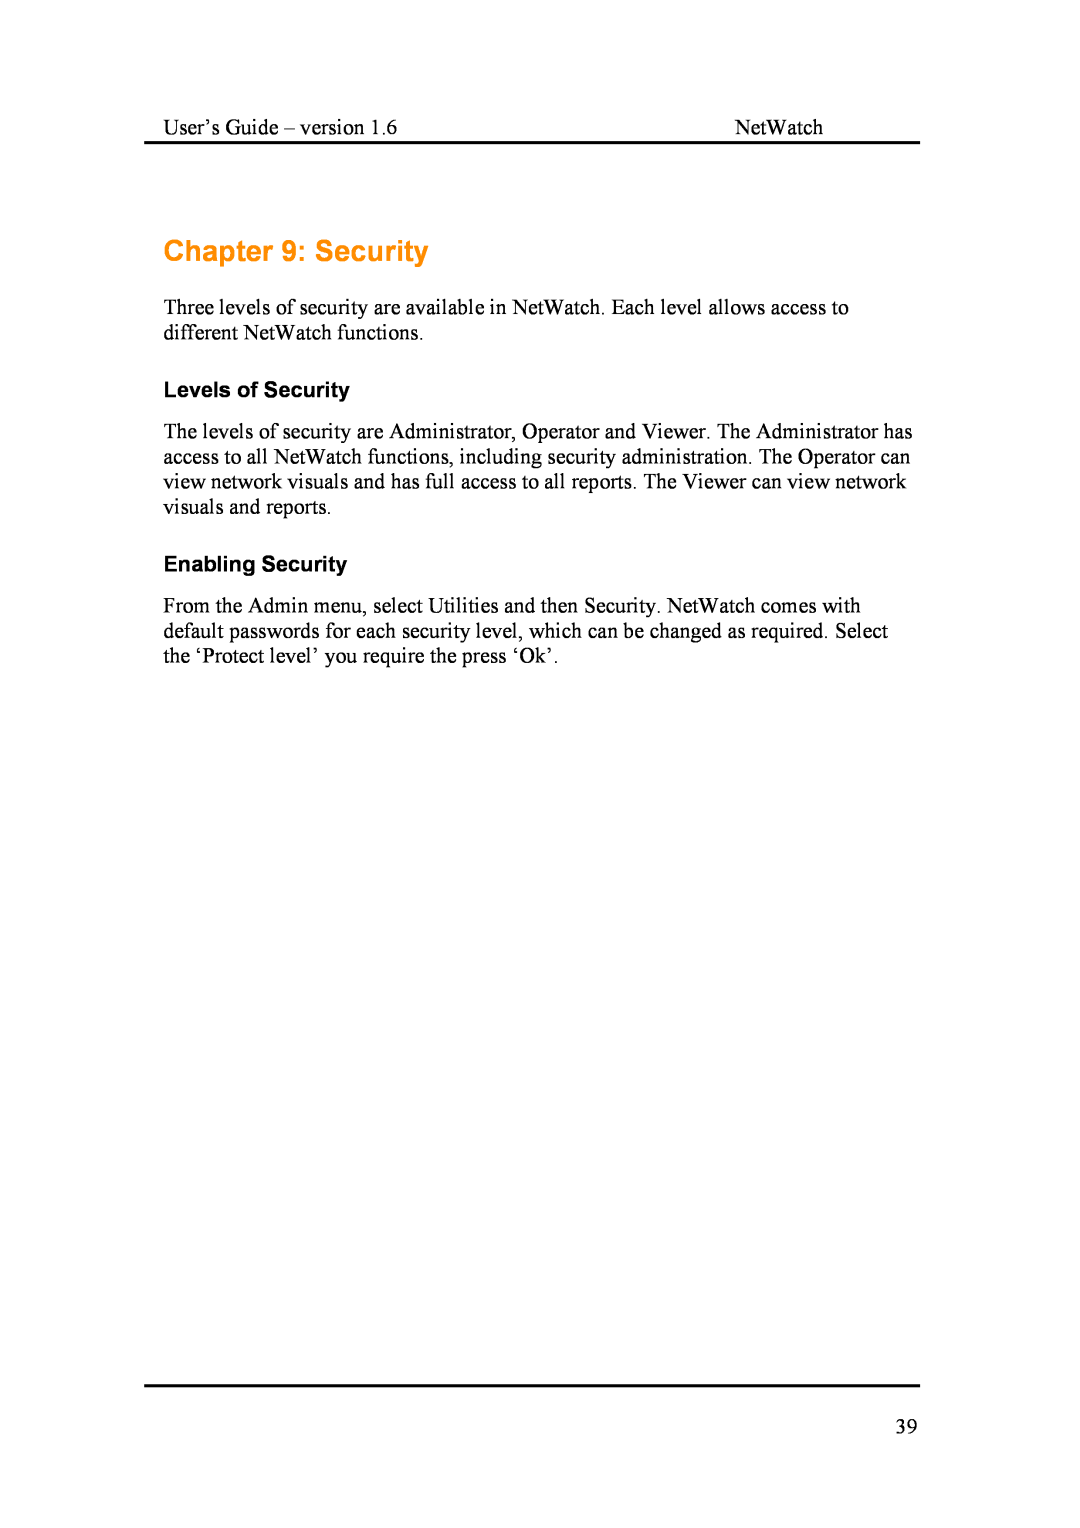 Fluke Network Router manual Levels of Security, Enabling Security 